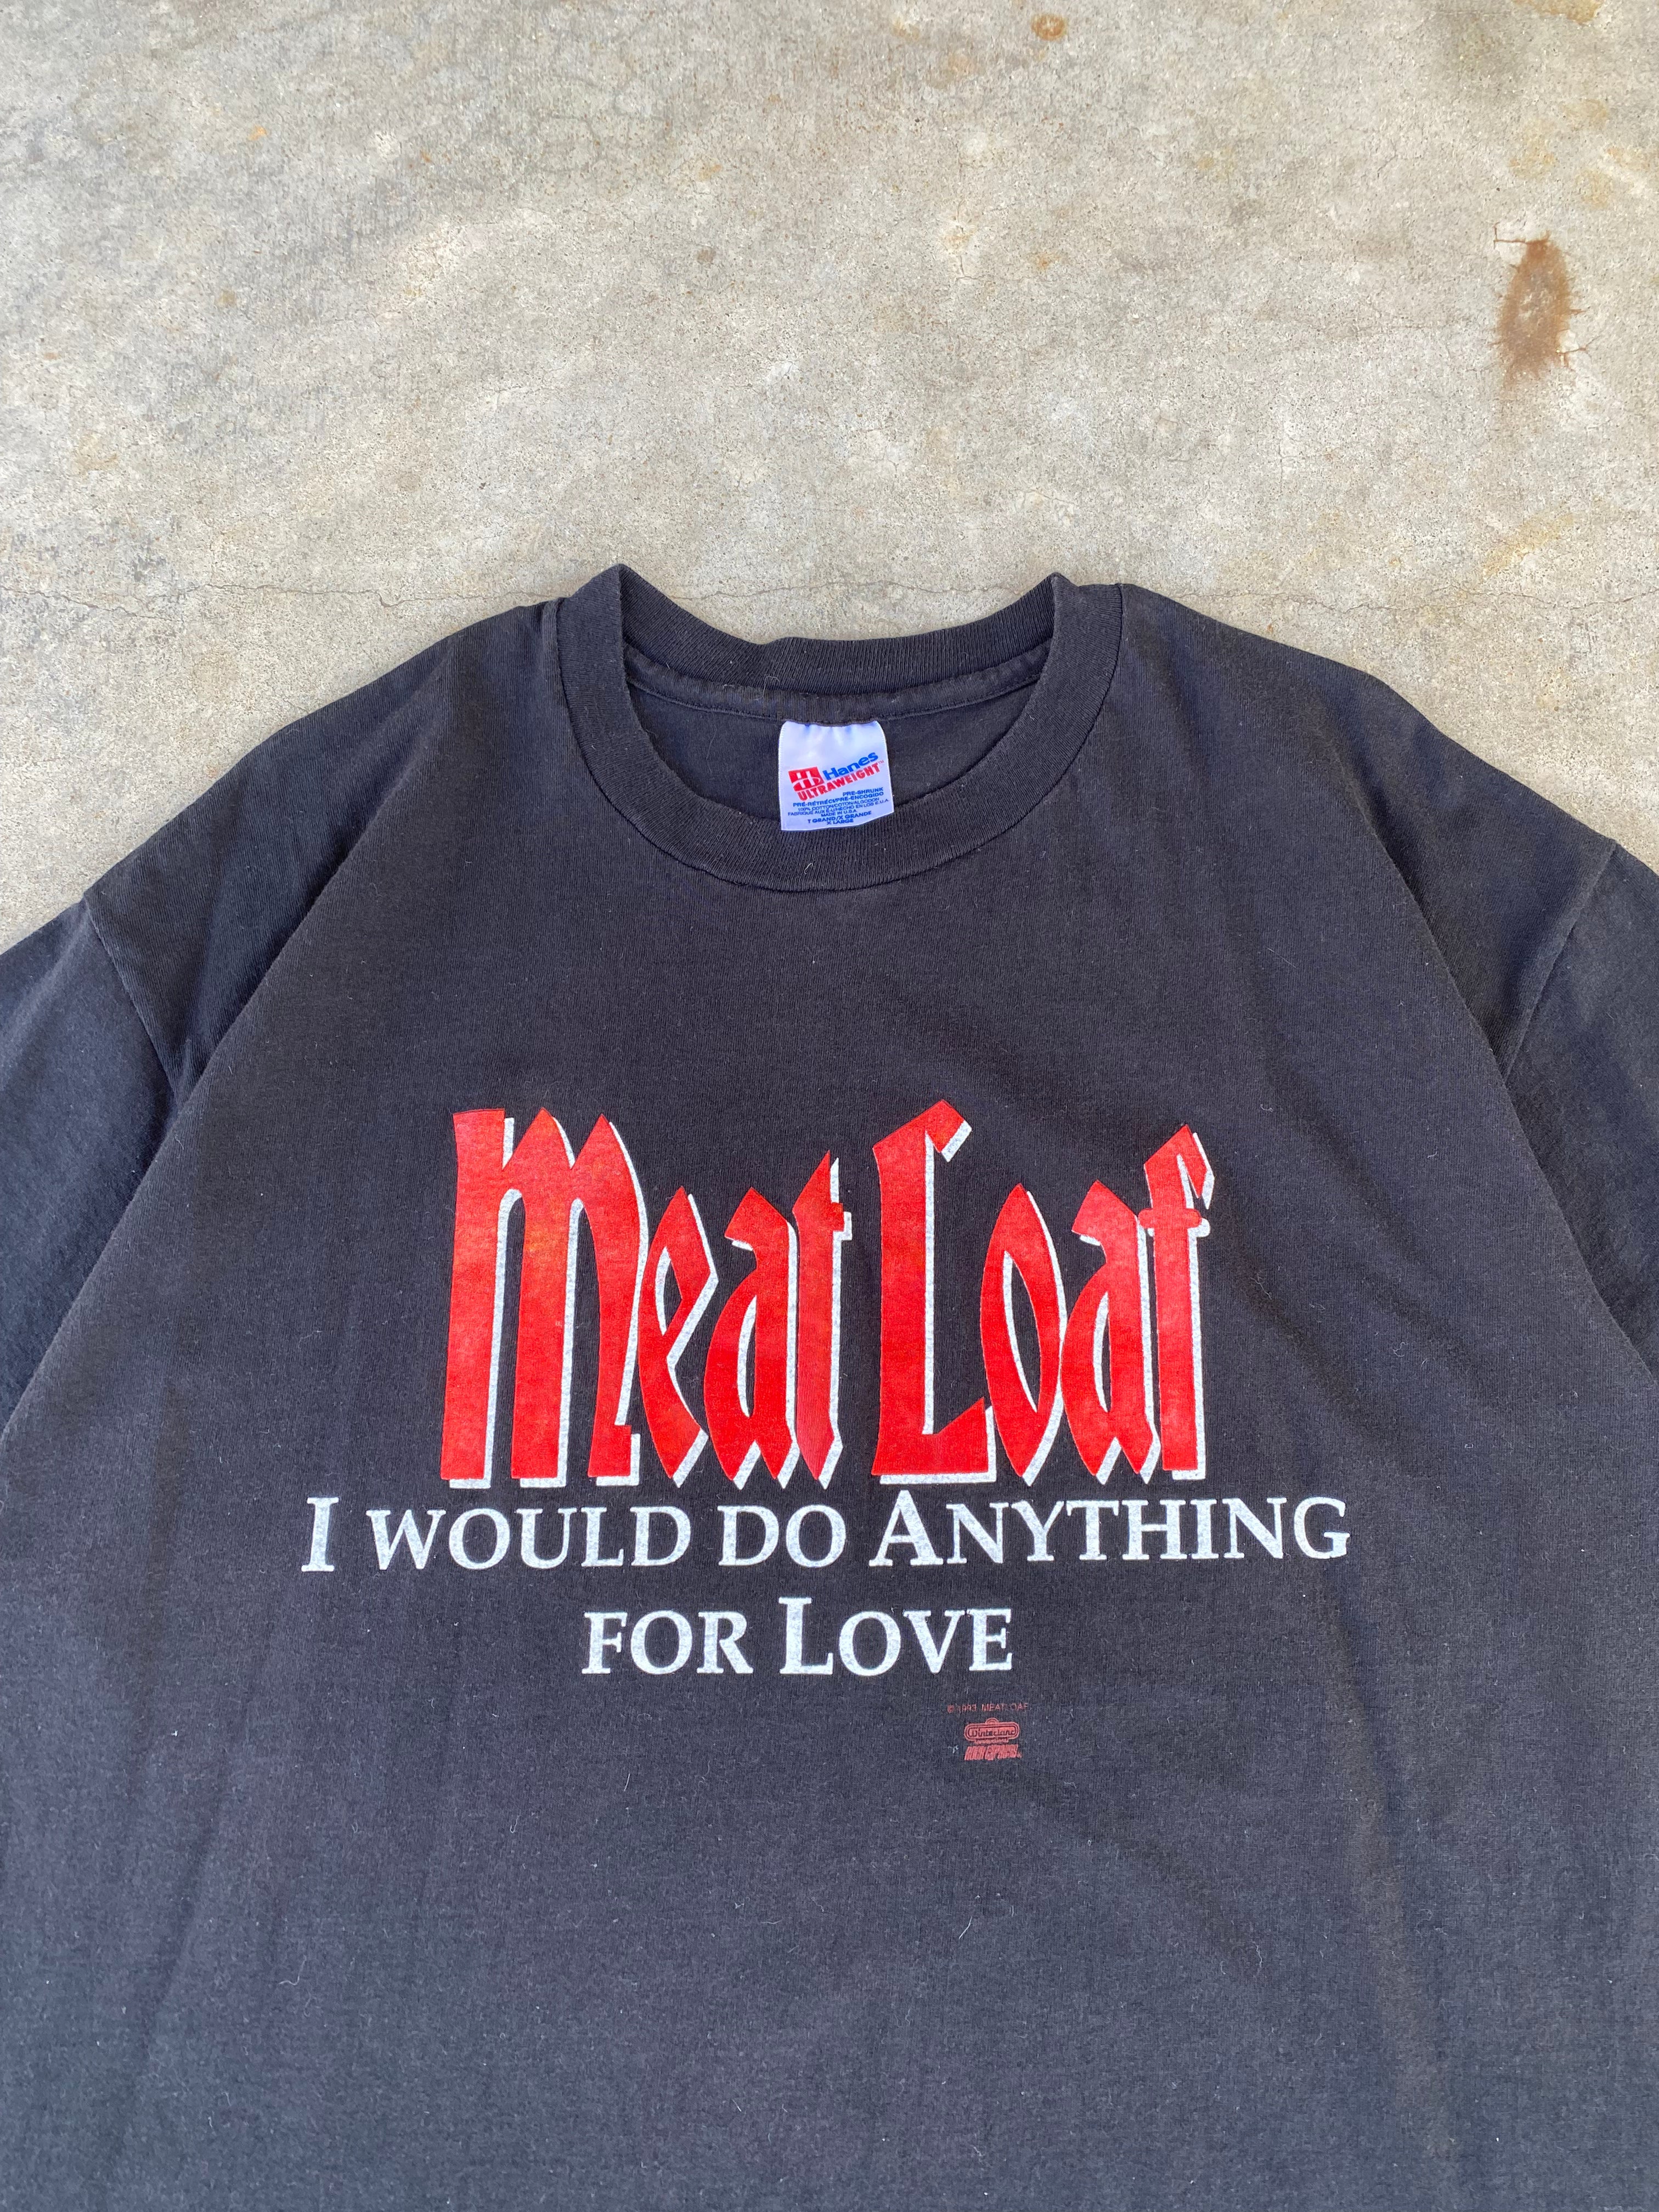 1993 Meat Loaf “I Would Do Anything For Love” T-Shirt (XL)